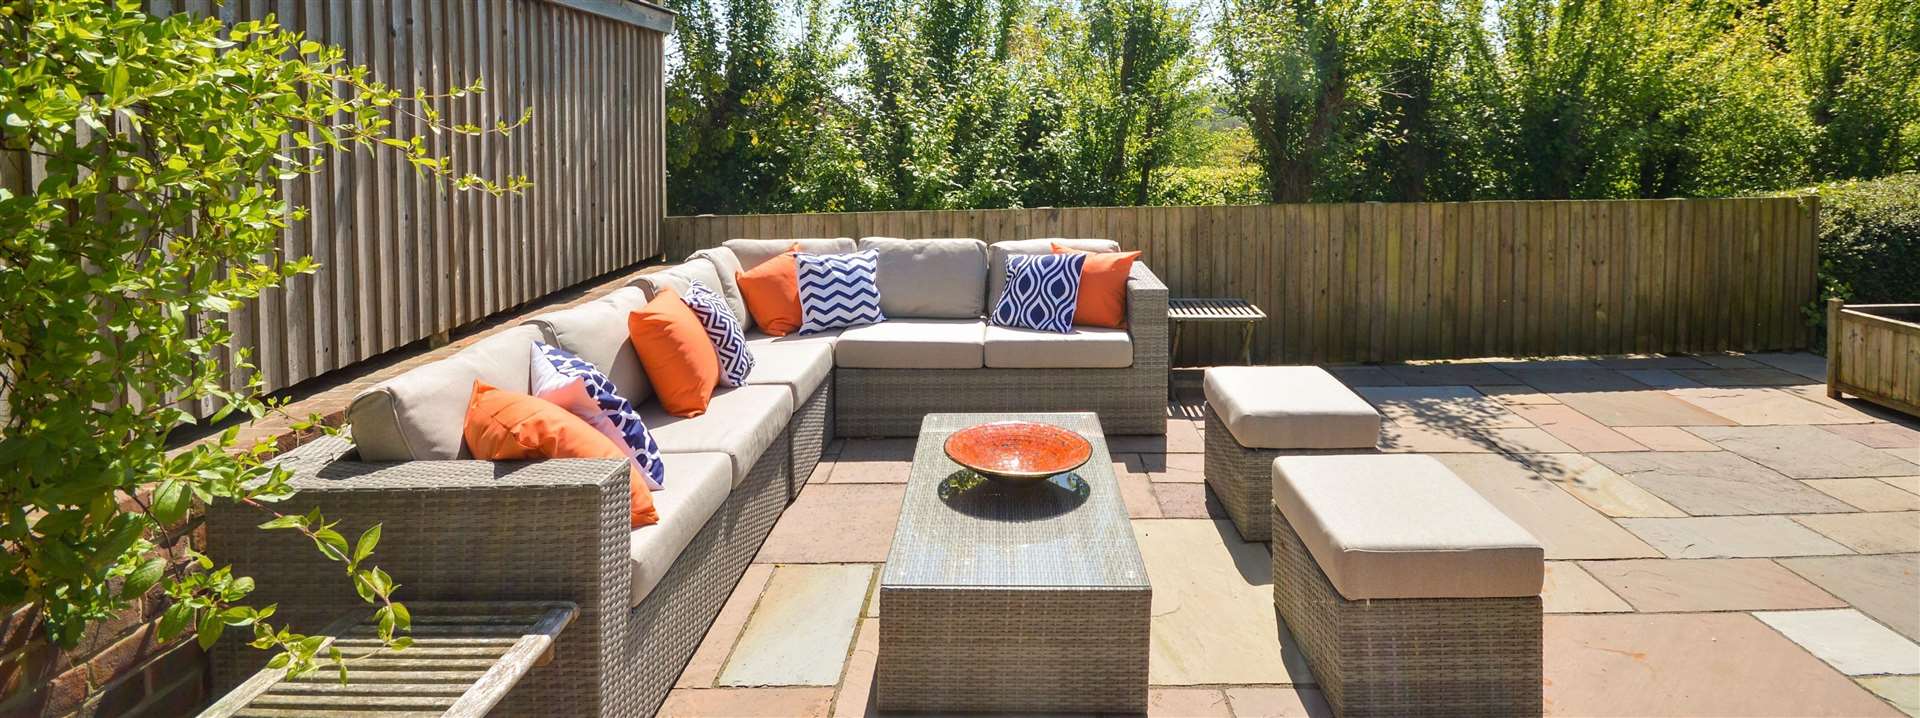 Make the most of the Indian sandstone terrace